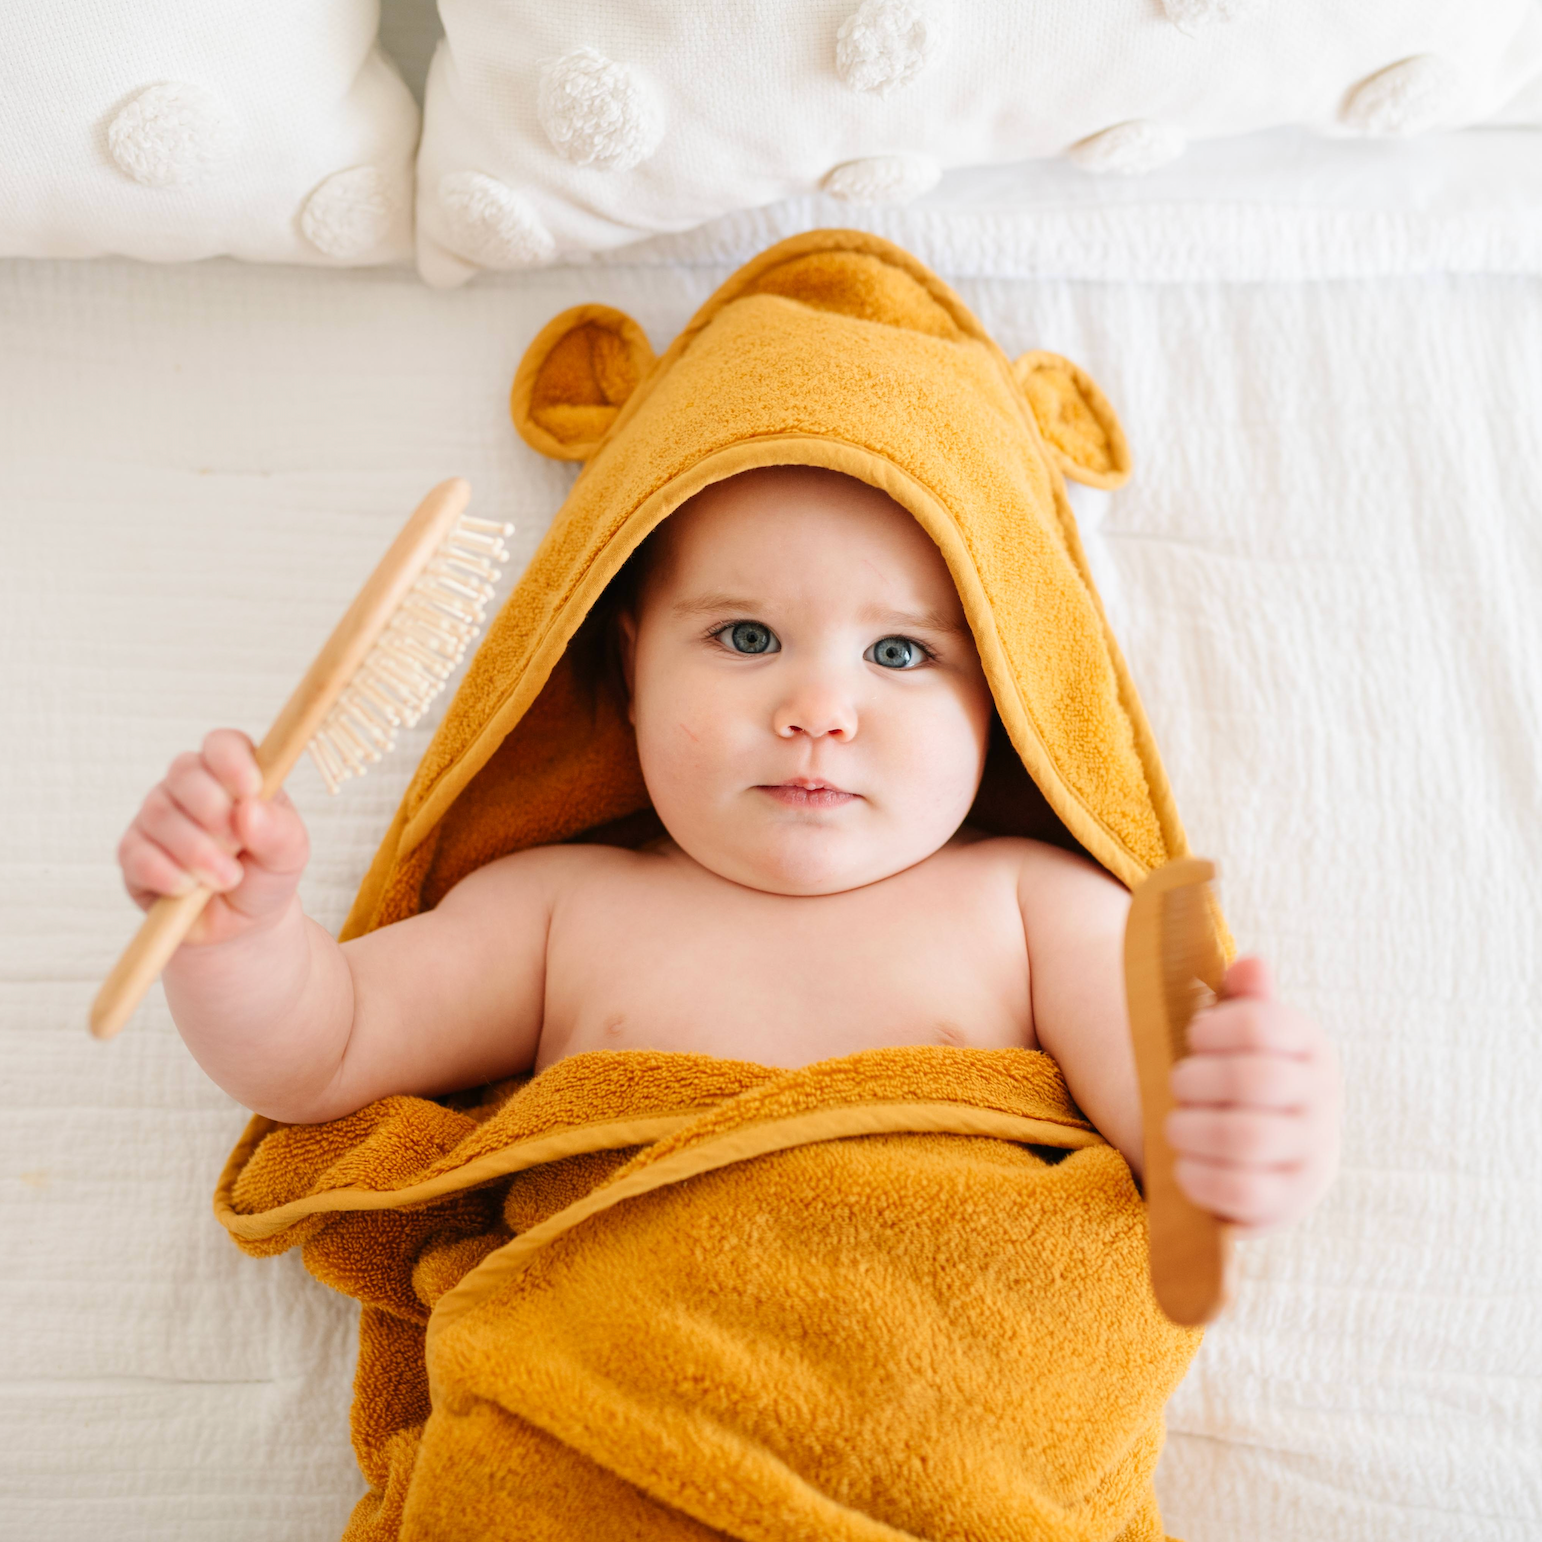 What is a Skincare Routine for a Baby?